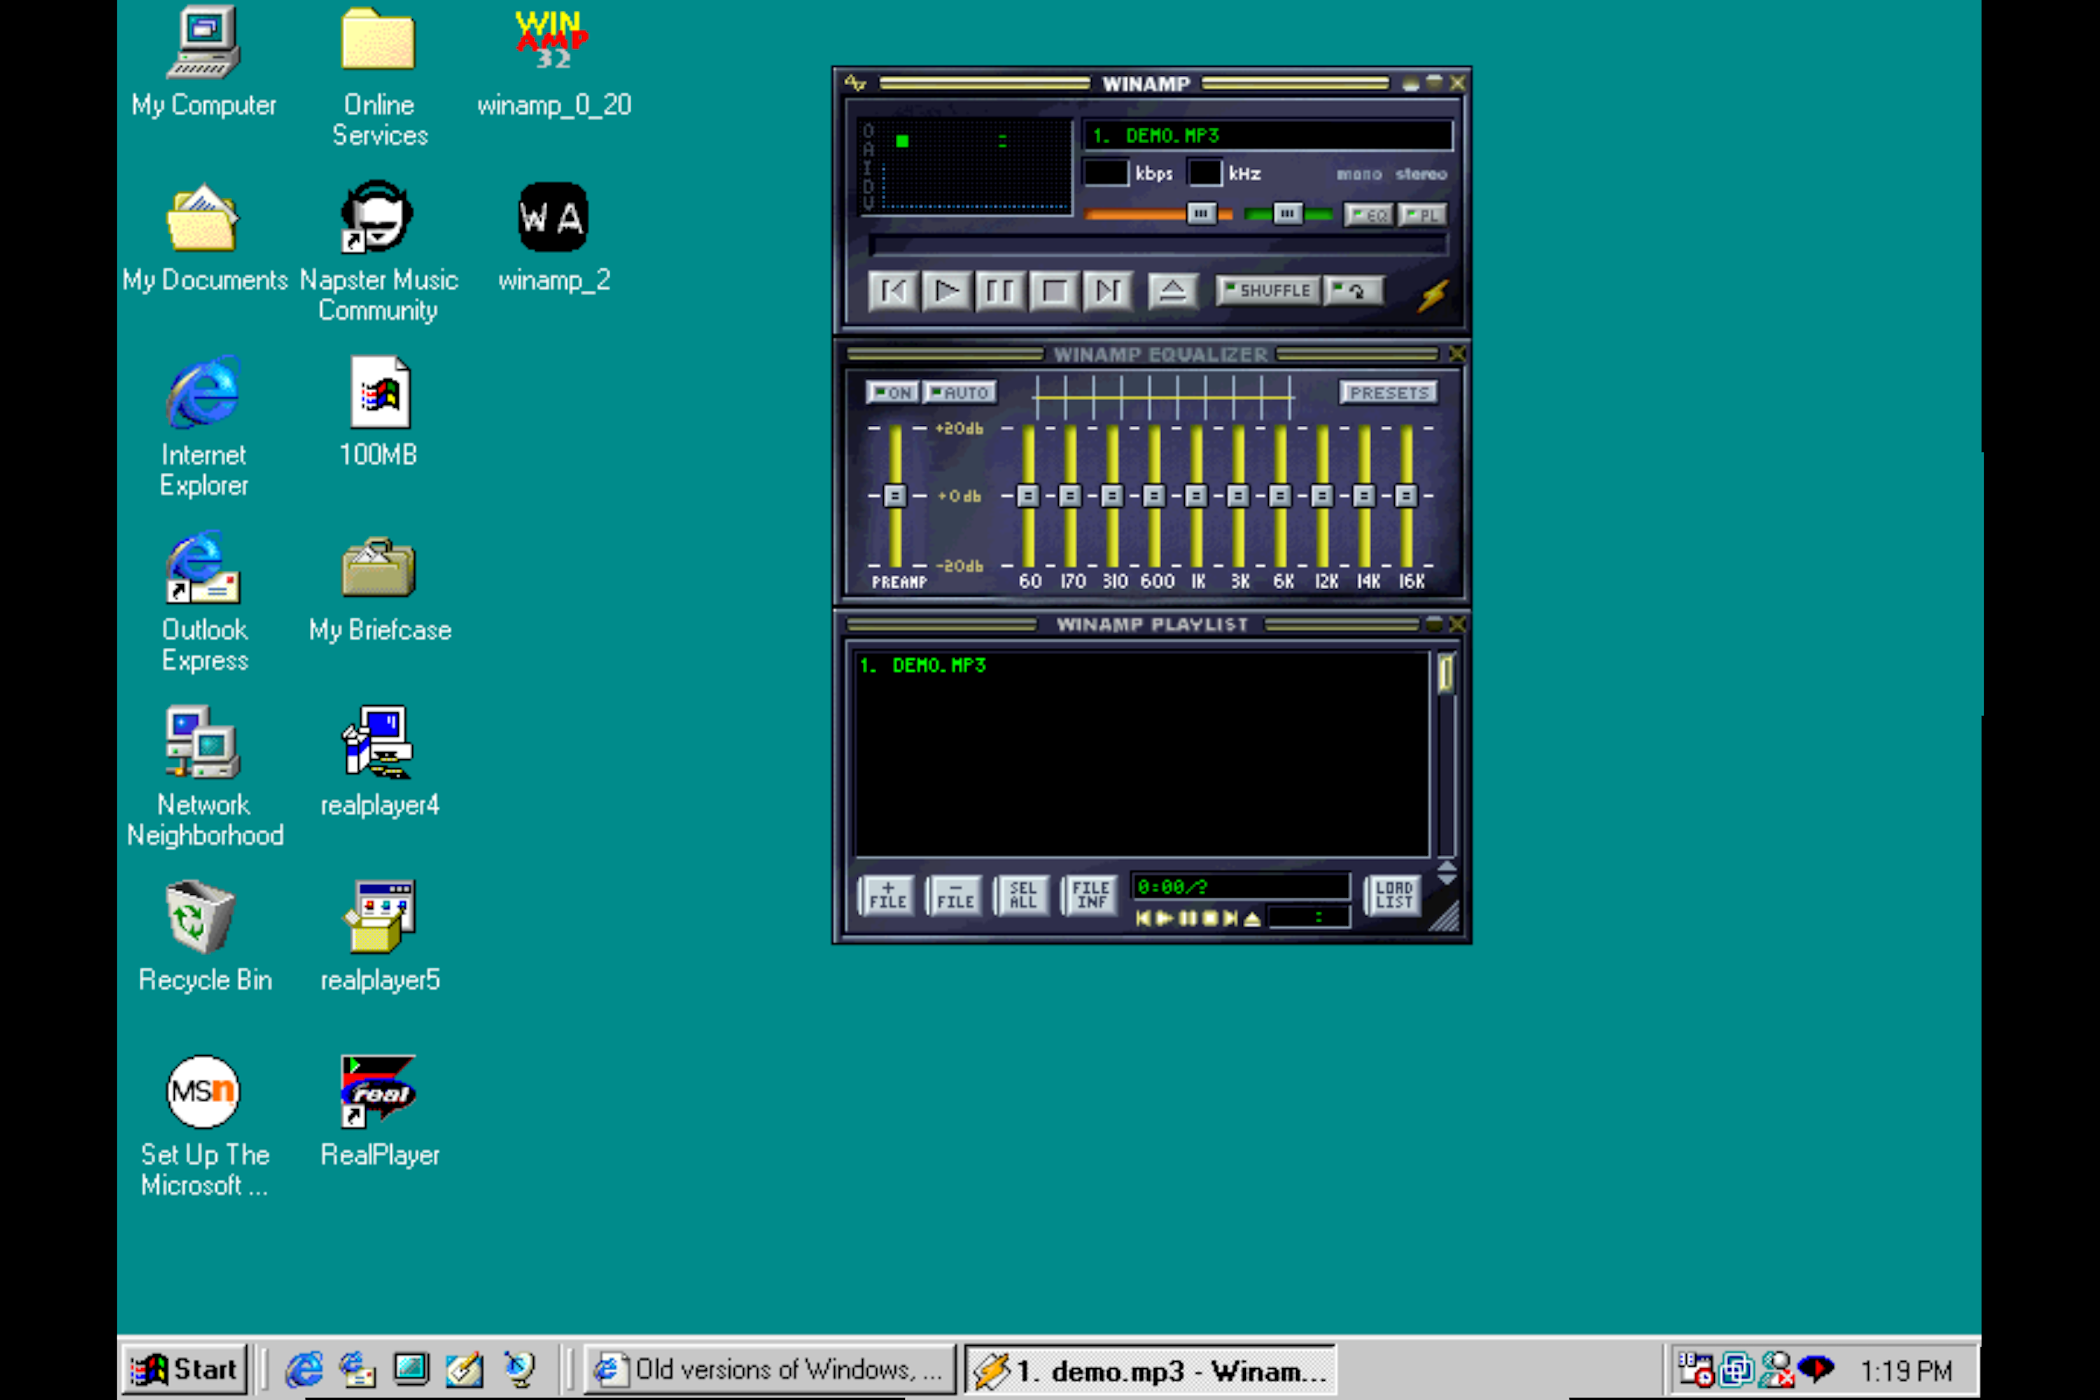 Get ready to relive the early 2000s with Winamp’s new open source release!